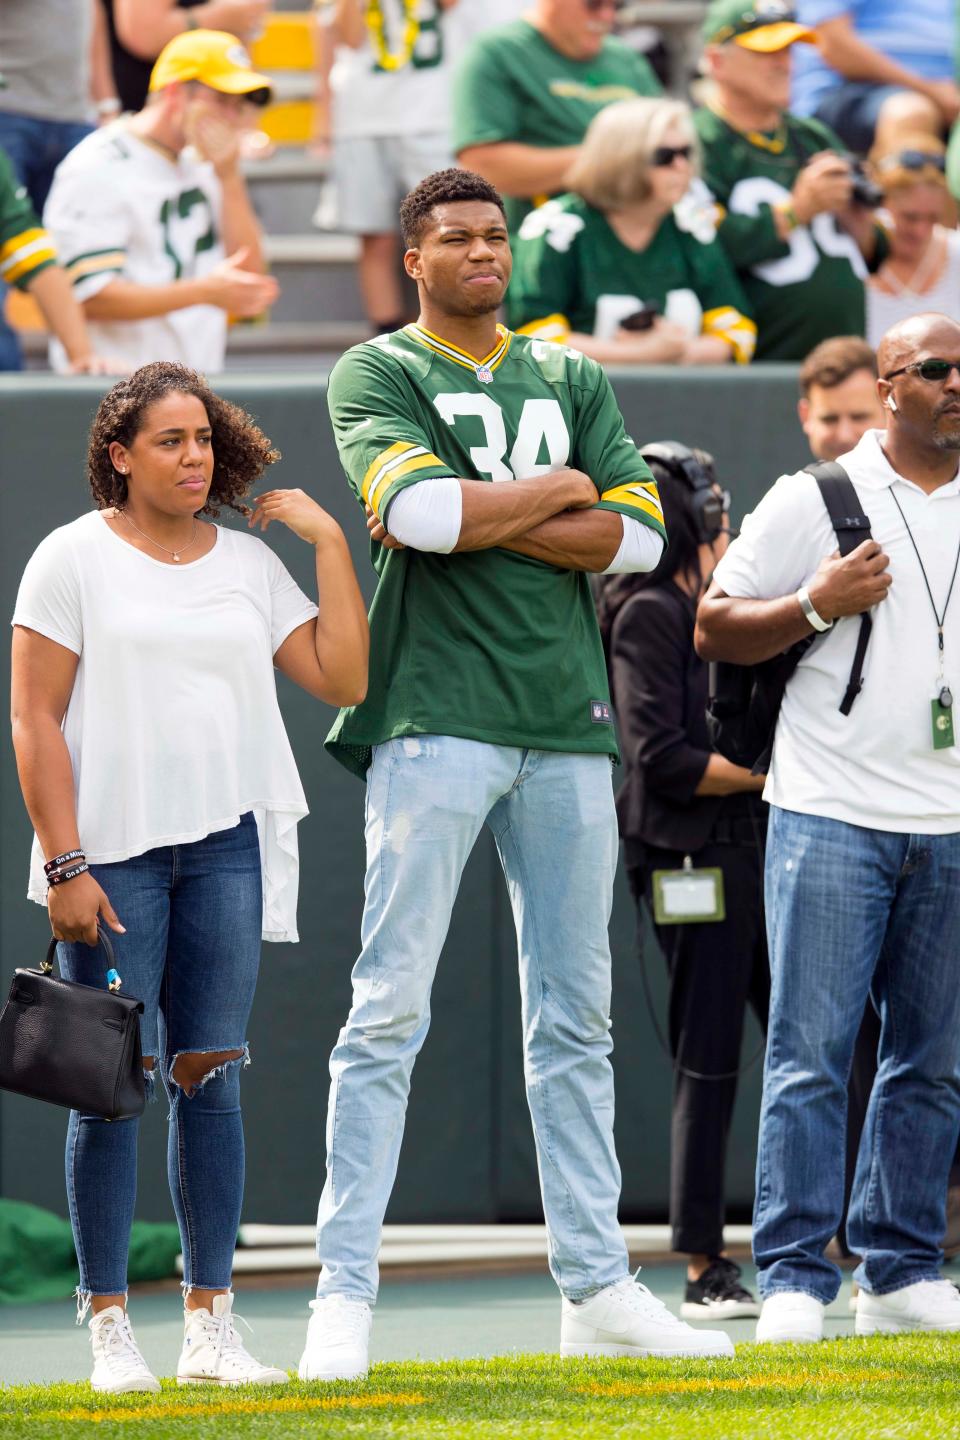 Bucks star Giannis Antetokounmpo took in his first Packers game in 2018. The Bucks' game against the Sacramento Kings has been moved up to 6 p.m. to avoid a direct conflict with the Packers' playoff game against the 49ers, which begins at 7:15 p.m.